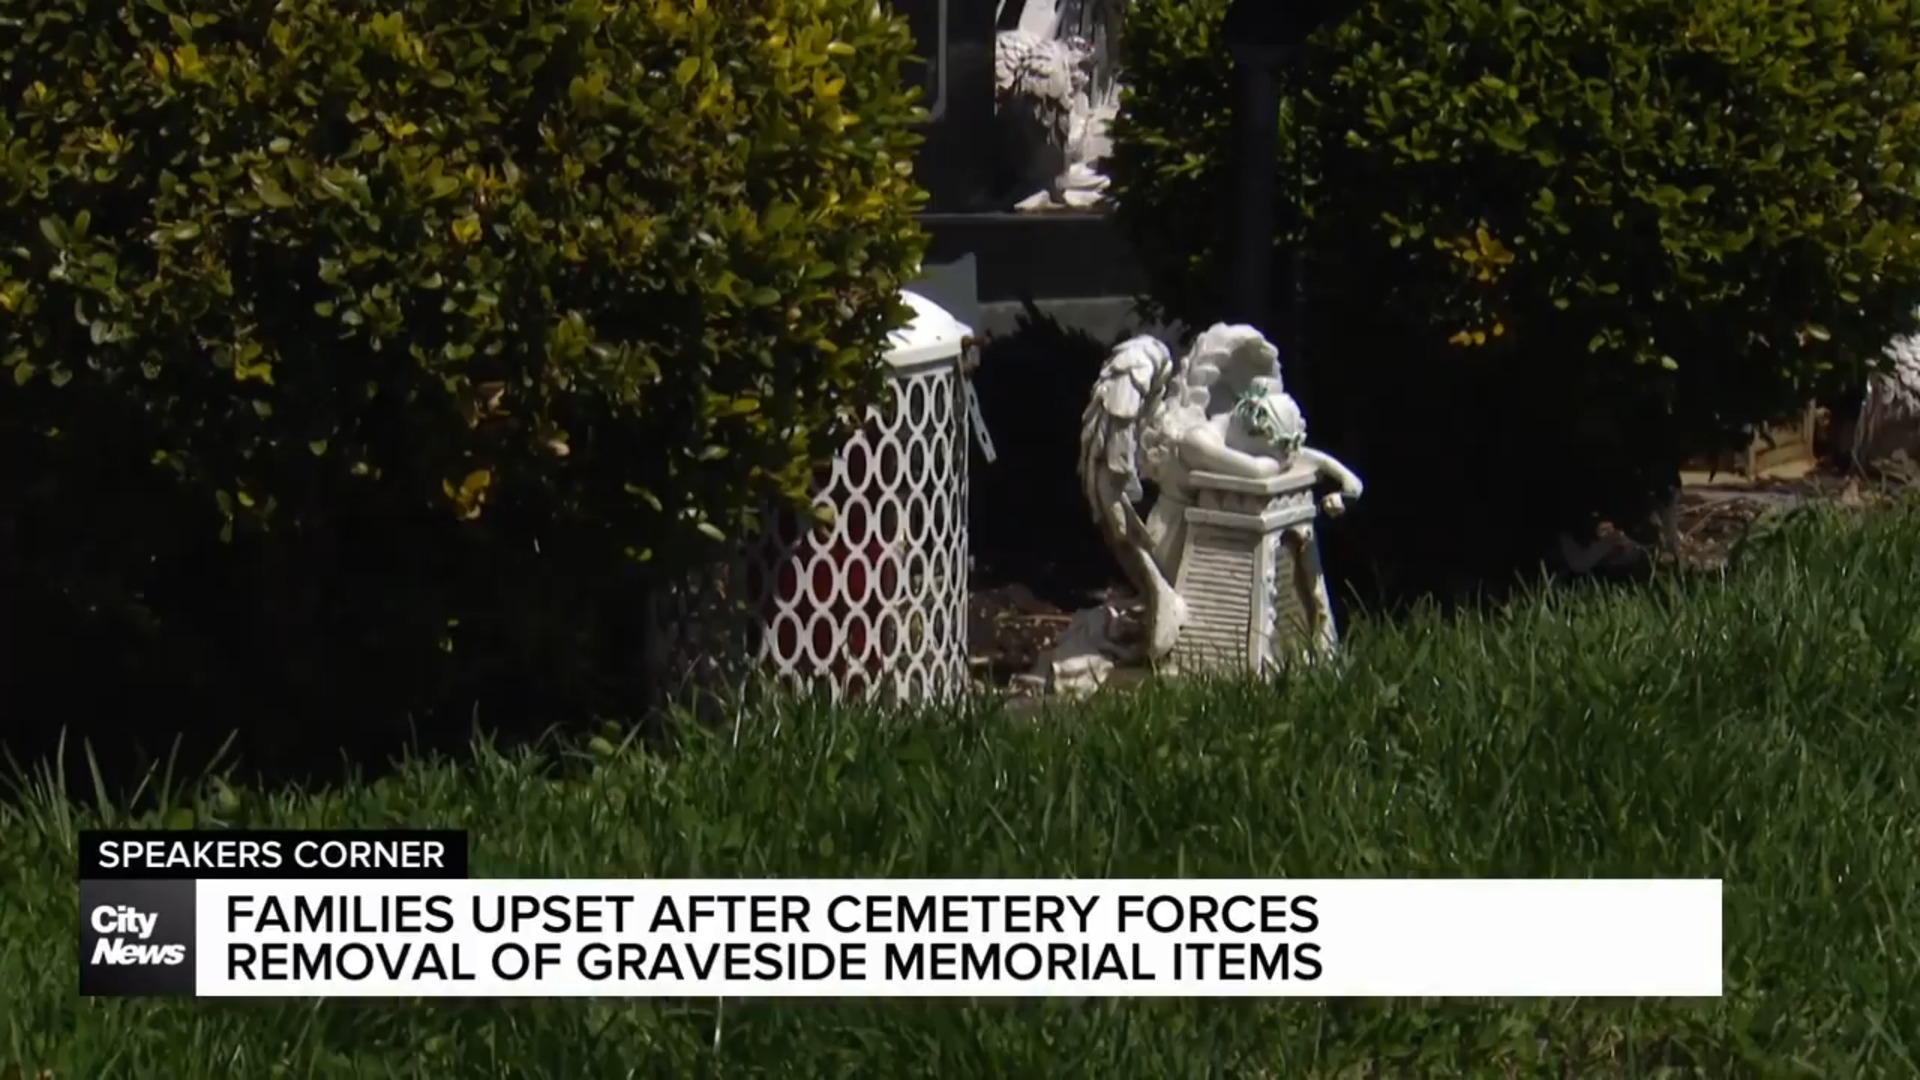 Ajax cemetery forces families to remove items from gravesites